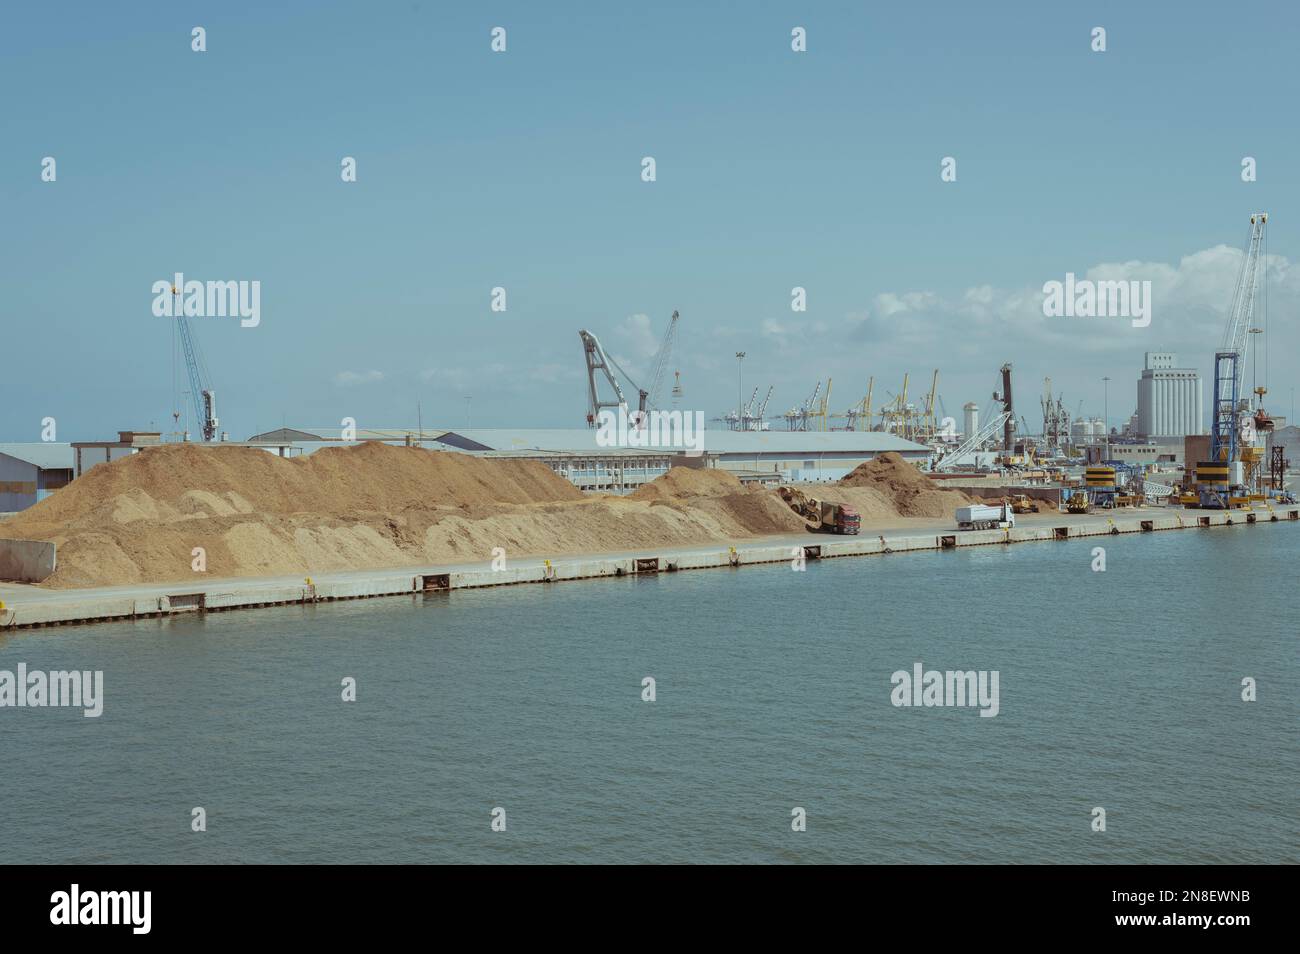 Livorno, Tuscany (Italy). Images of the port of Livorno during a working day Stock Photo